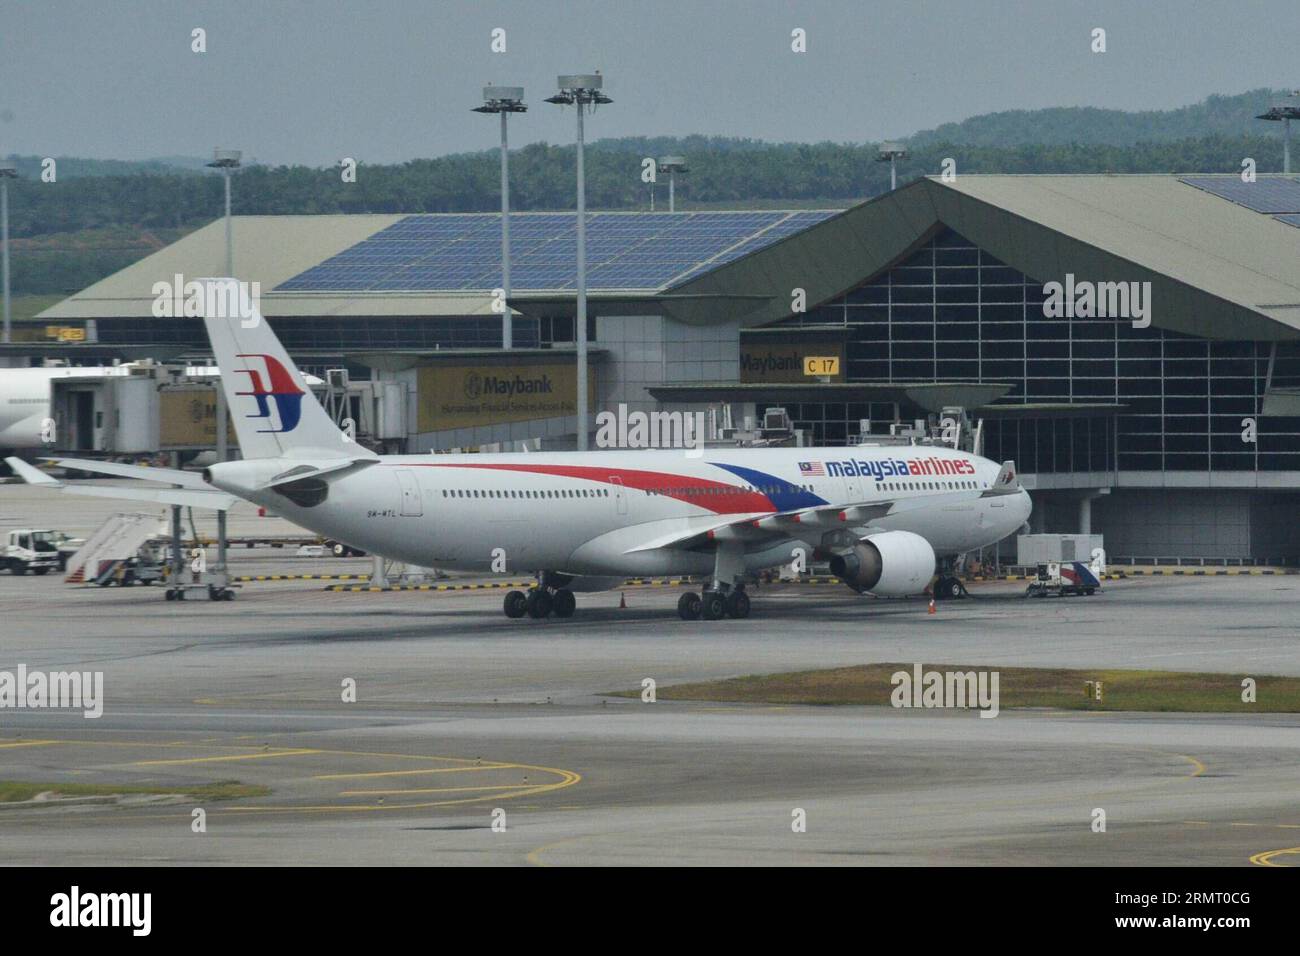 (140808) -- KUALA LUMPUR, Aug. 8, 2014 -- A Malaysia Airlines flight is seen parking at the Kuala Lumpur International Airport in Kuala Lumpur, Malaysia, Aug. 8, 2014. Khazanah Nasional Bhd, Malaysia Airlines (MAS) largest shareholder, said on Friday that it sought to delist the national carrier to facilitate its plan to undertake a comprehensive review and restructuring of MAS. ) MALAYSIA-MAS-KHAZANAH NASIONAL BHD-DELIST ChongxVoonxChung PUBLICATIONxNOTxINxCHN   Kuala Lumpur Aug 8 2014 a Malaysia Airlines Flight IS Lakes Parking AT The Kuala Lumpur International Airport in Kuala Lumpur Malays Stock Photo